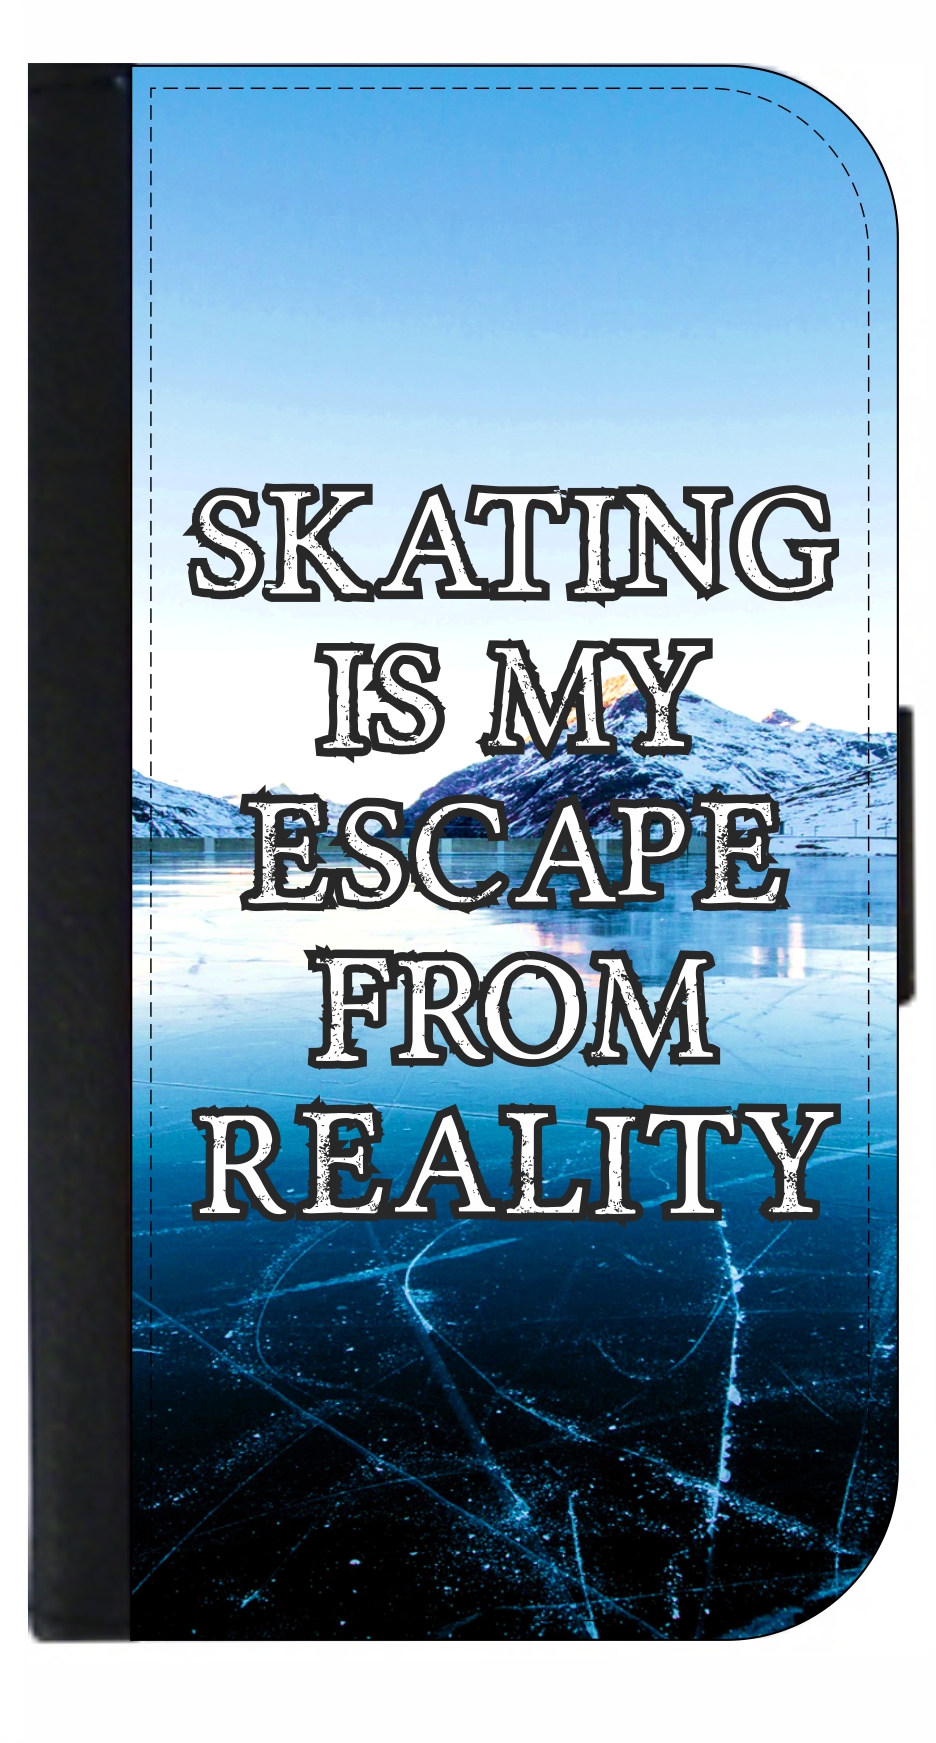 Skating Is My Escape From Reality - Galaxy s10p Case - Galaxy s10 Plus Case - Galaxy s10 Plus Wallet Case - s10 Plus Case Wallet - Galaxy s10 Plus Case Wallet - s10 Plus Case Flip Cover - image 1 of 3